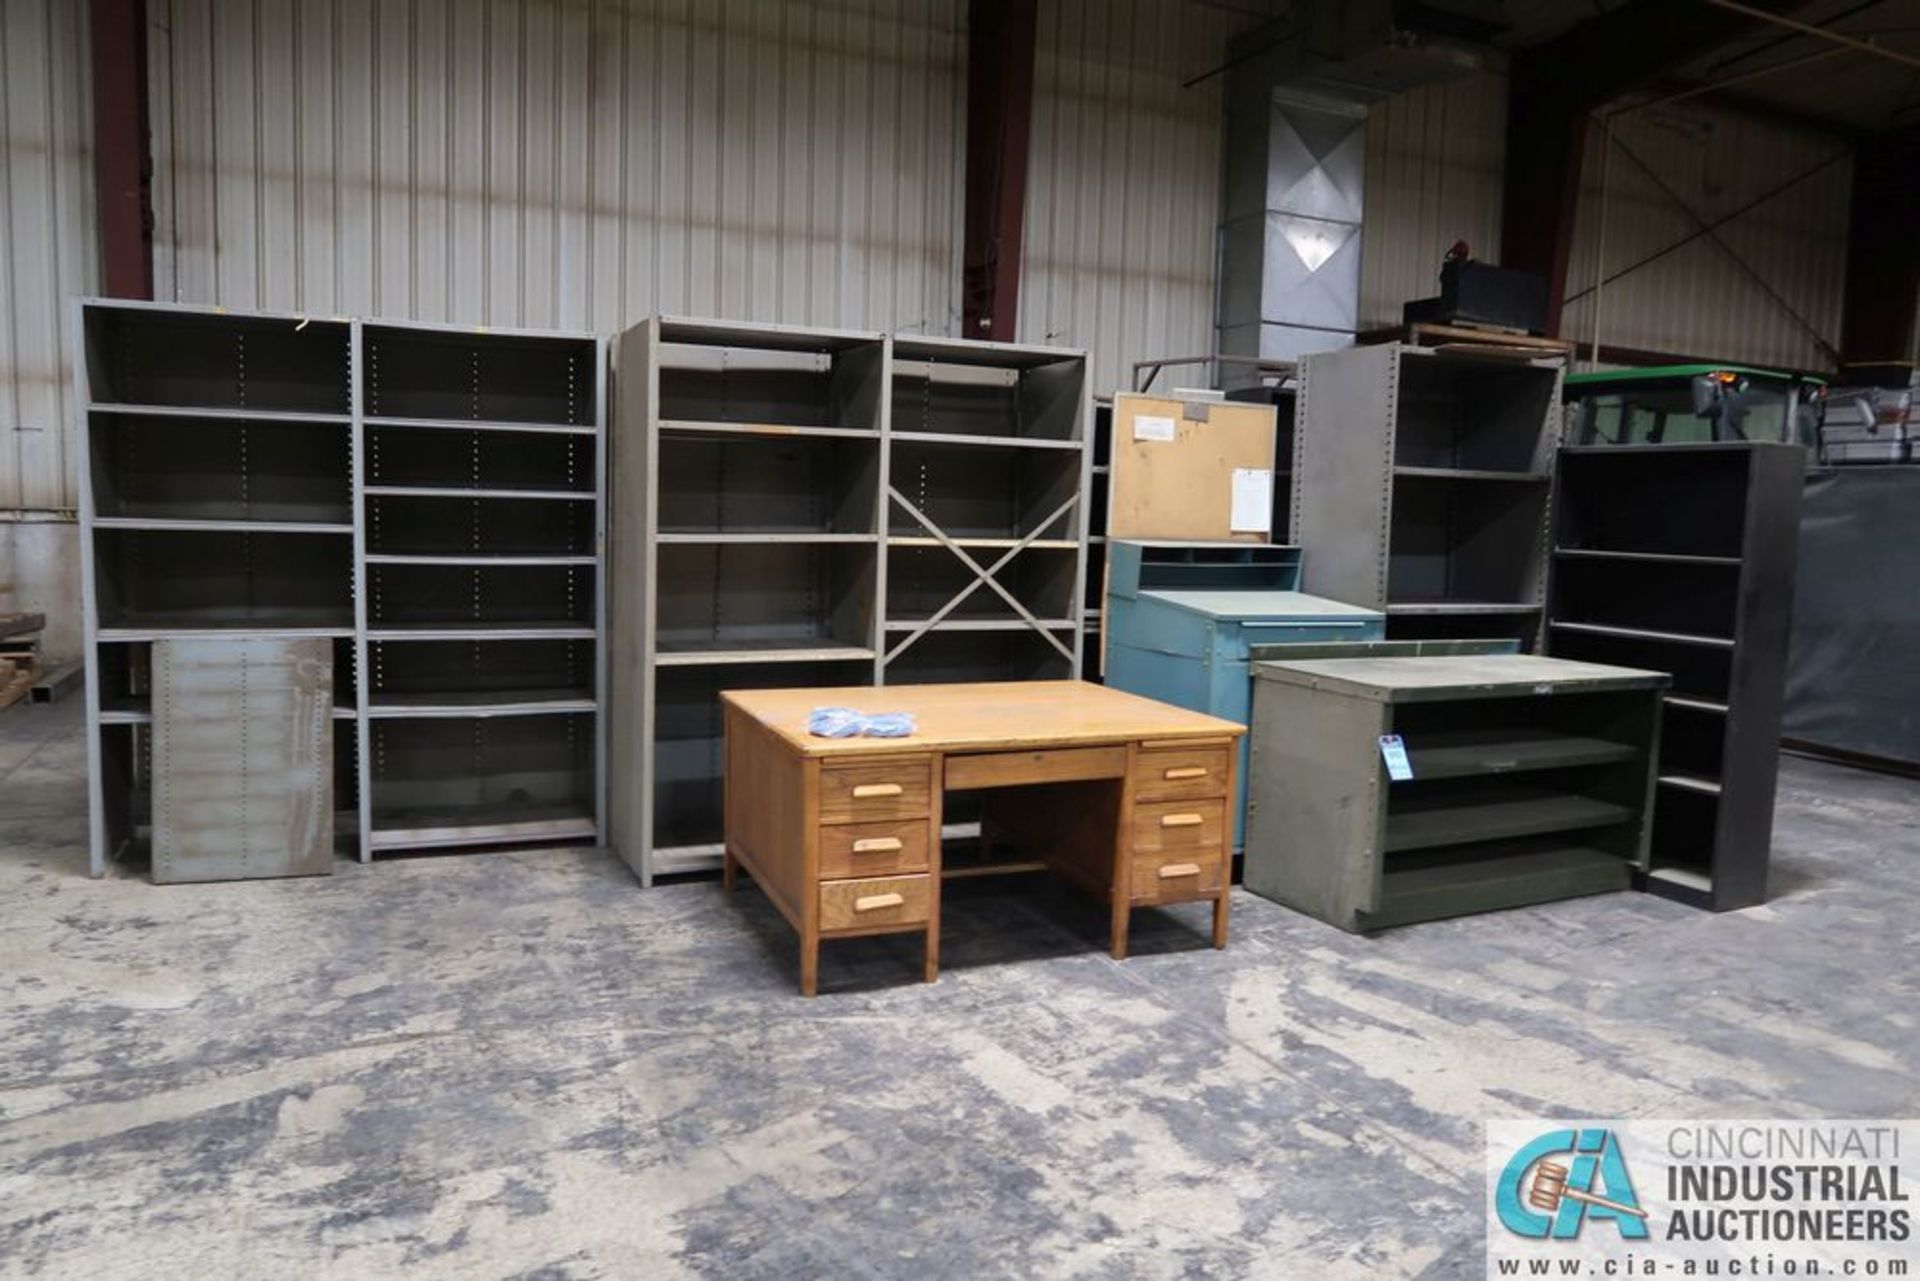 (LOT) ASSORTED STEEL SHELVING; (11) SECTIONS AND (1) WOOD DECK